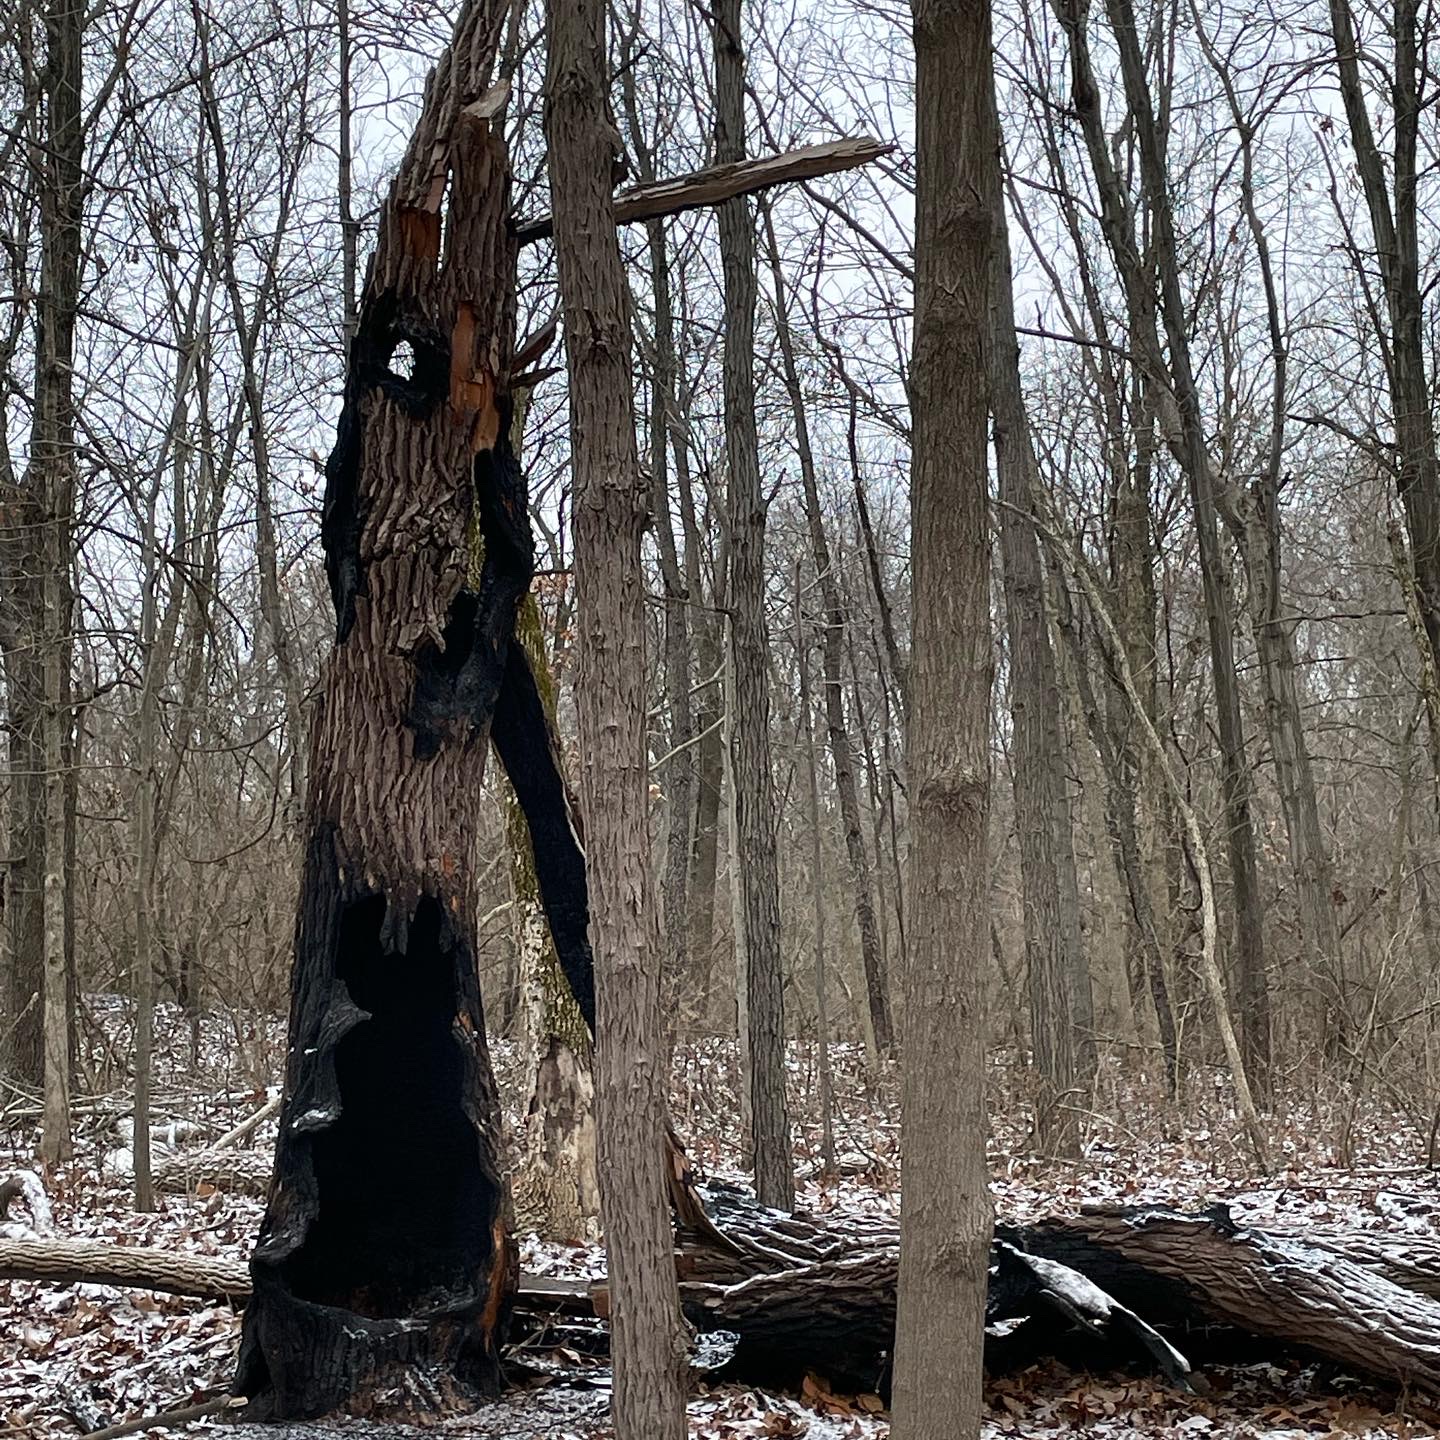 Photo of a lightning damaged tree trunk. The damaged trunk is surrounded by thin trees and fallen leaves covered in a light dusting of snow. Photo by Mara Thacker.